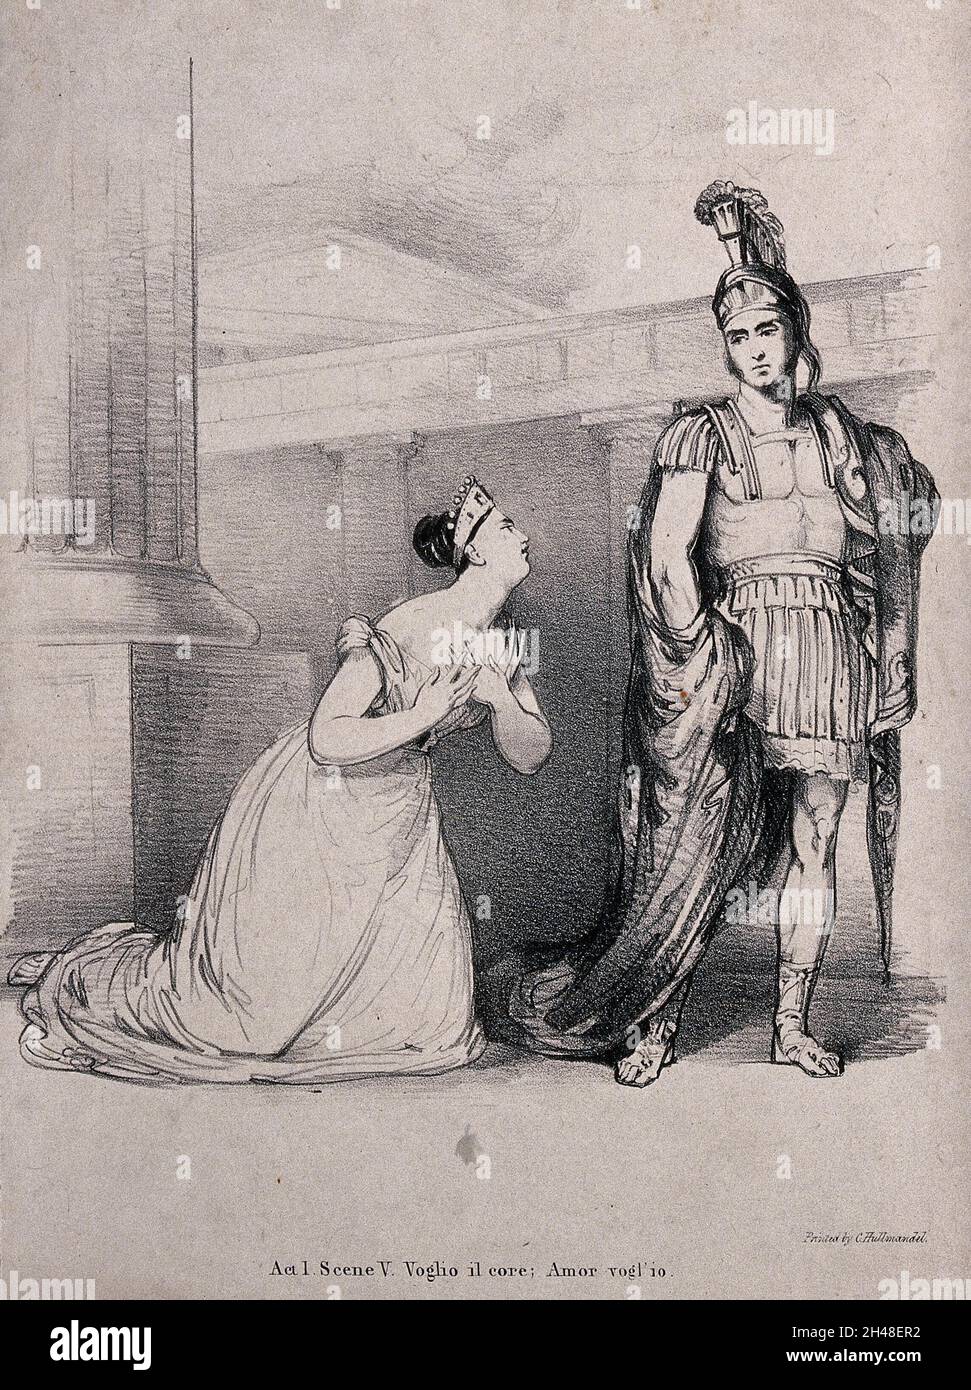 Giuditta Pasta in the role of Medea and Alberico Curioni in the role of Jason: Medea professes her love for Jason. Lithograph by J. Hayter, 1827. Stock Photo